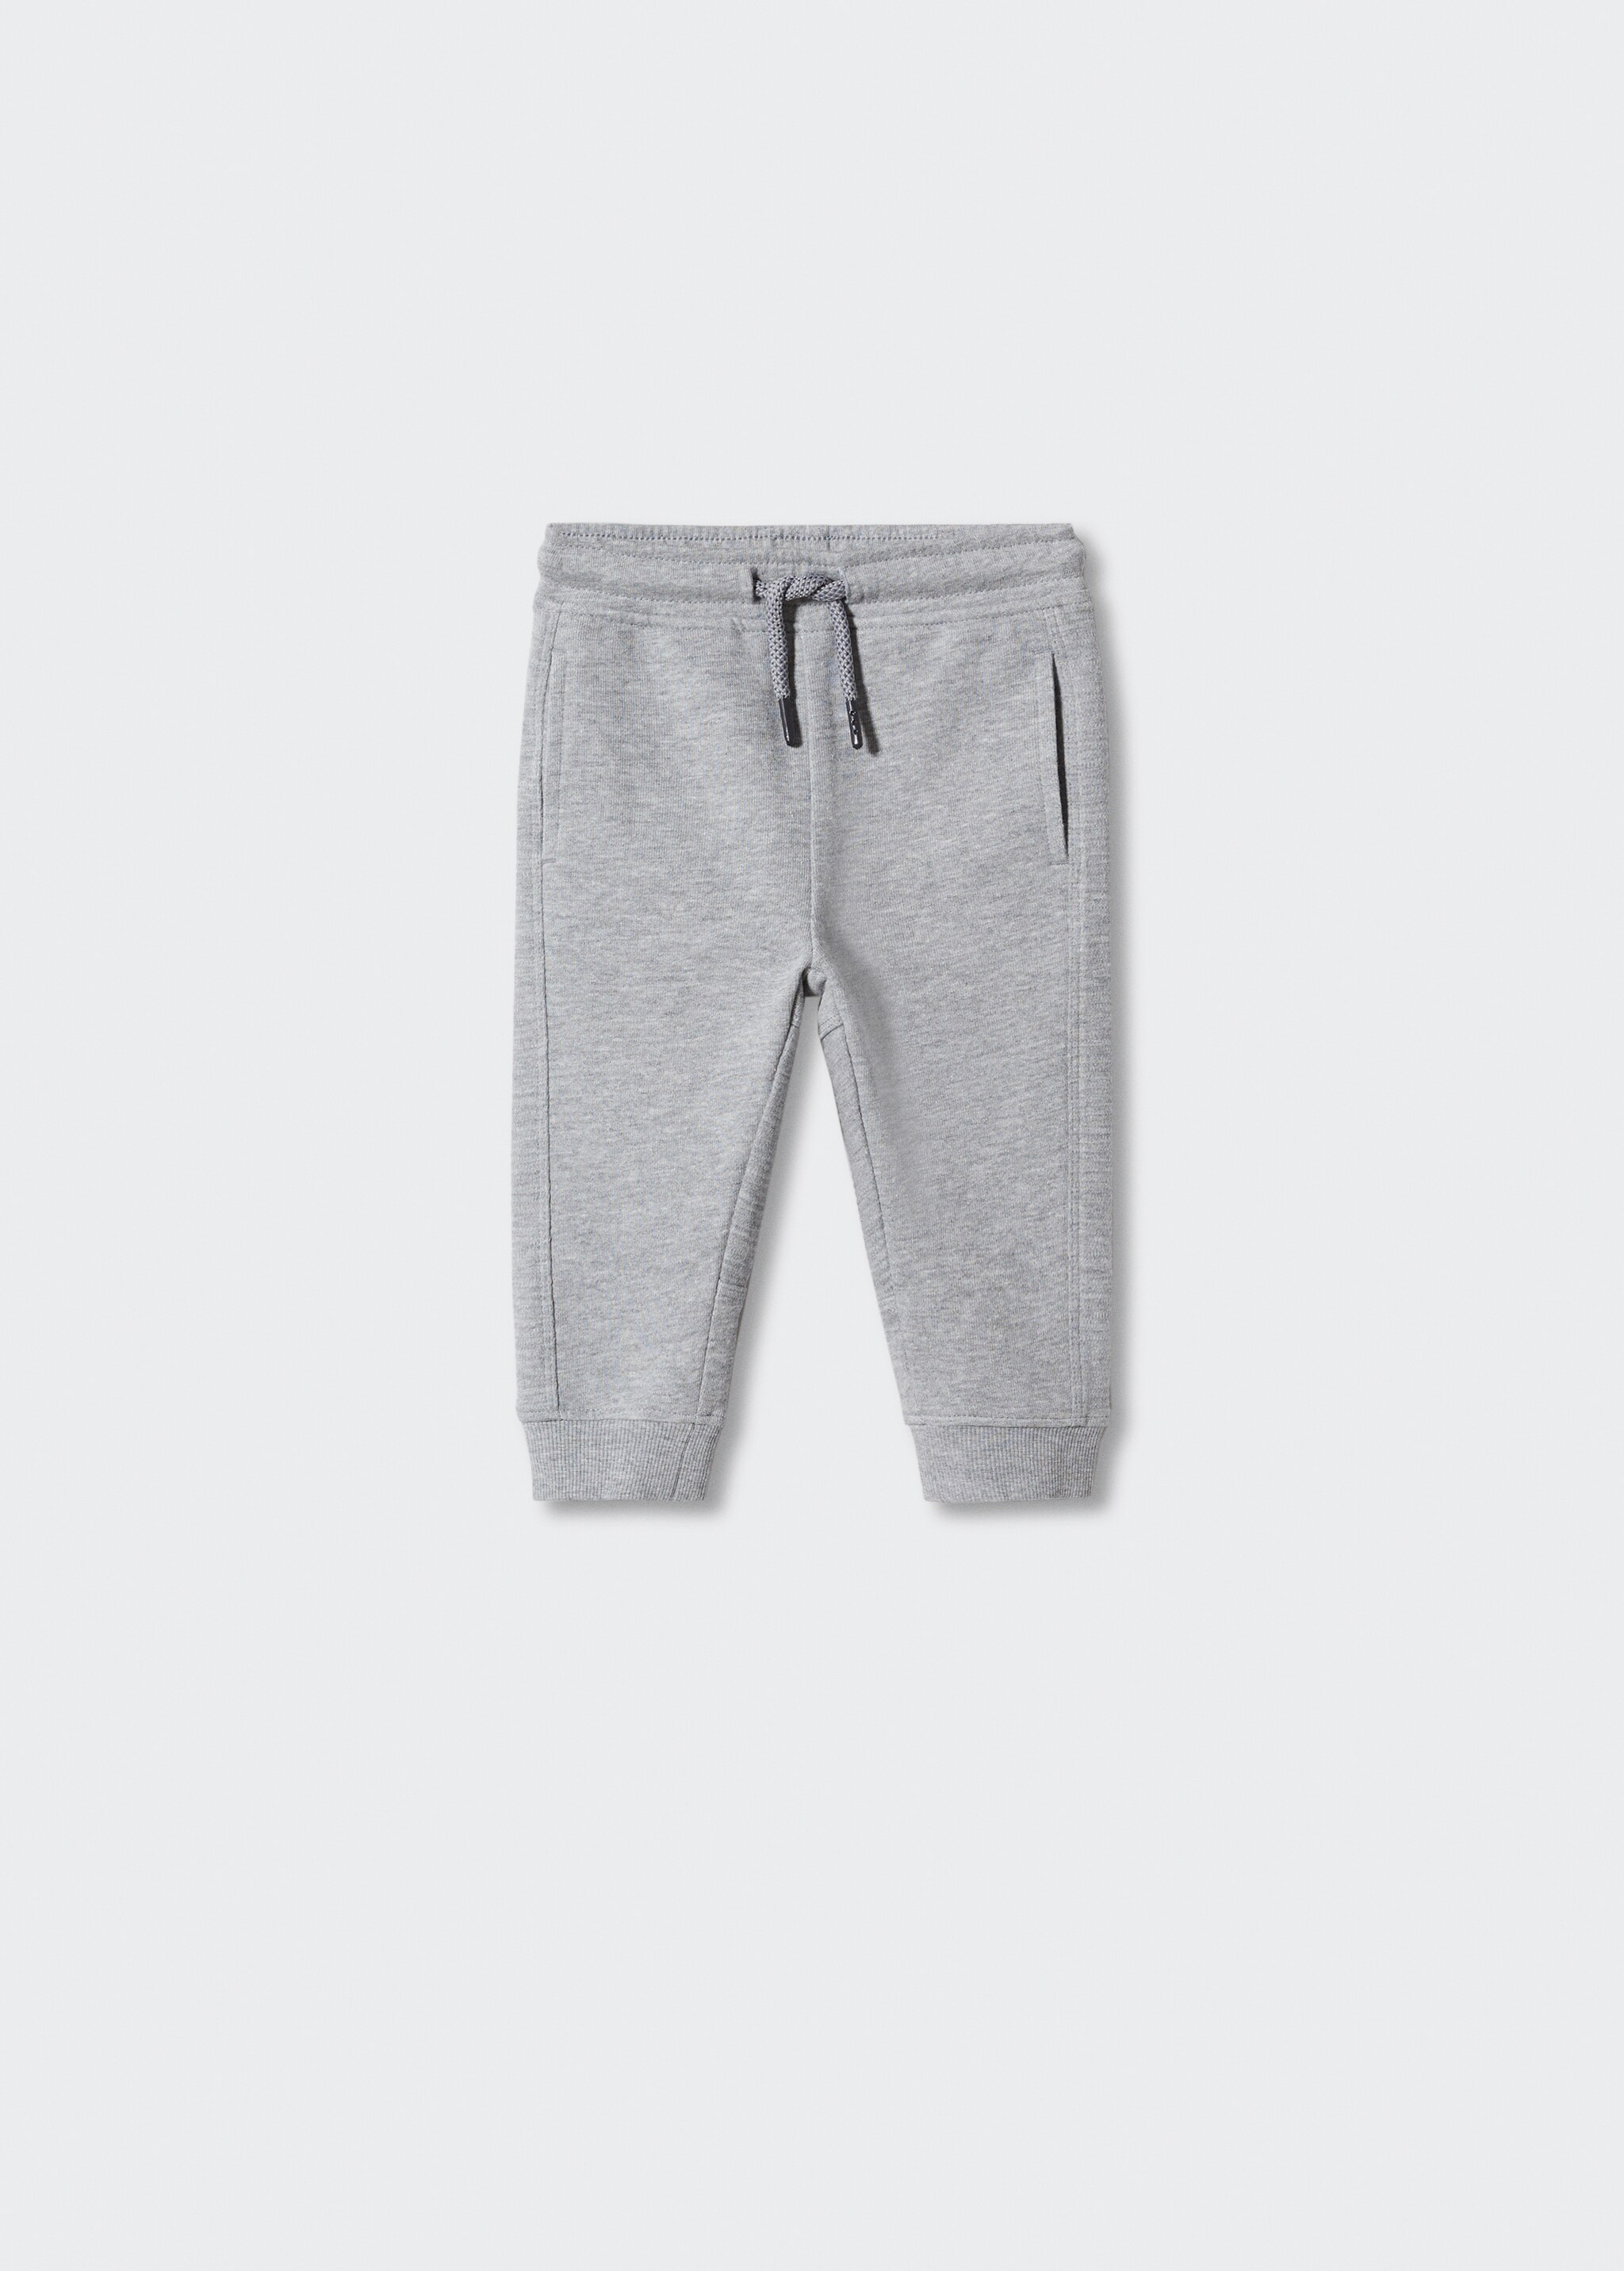 Drawstring jogger trousers - Article without model